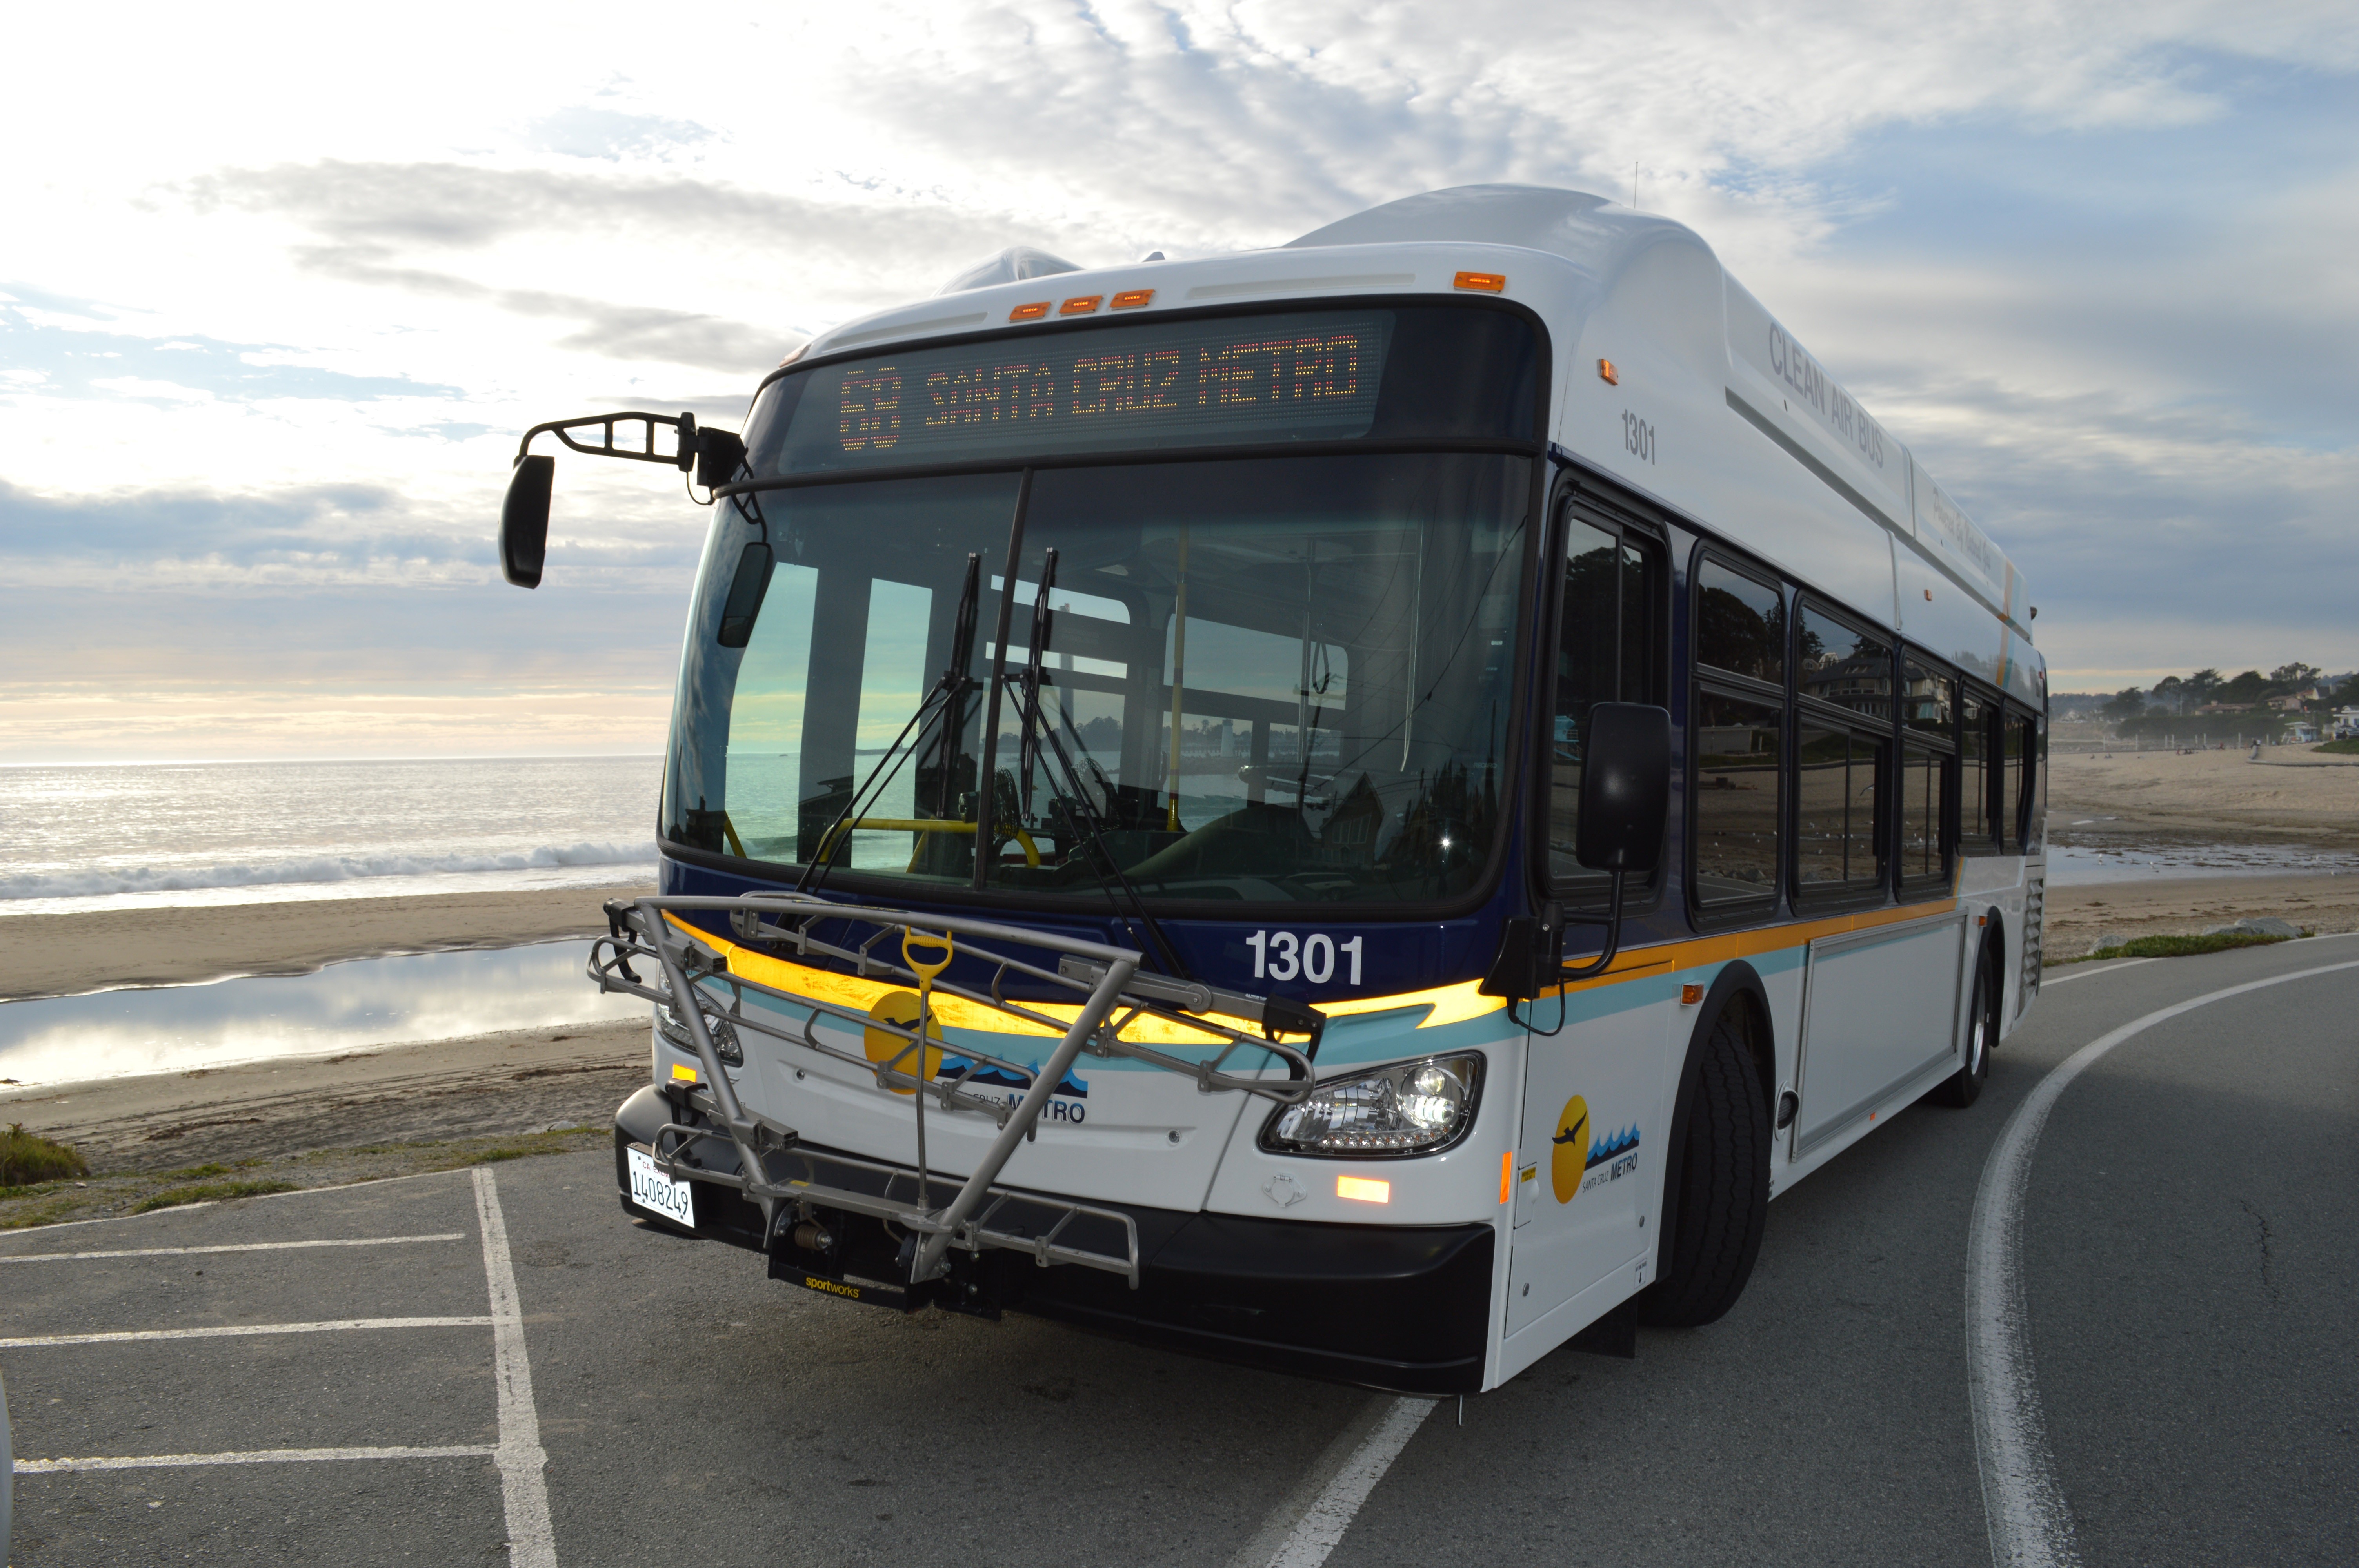 Masabi ticketing app enables riders to purchase passes for up to 31 days (Credit: Santa Cruz Metropolitan District)